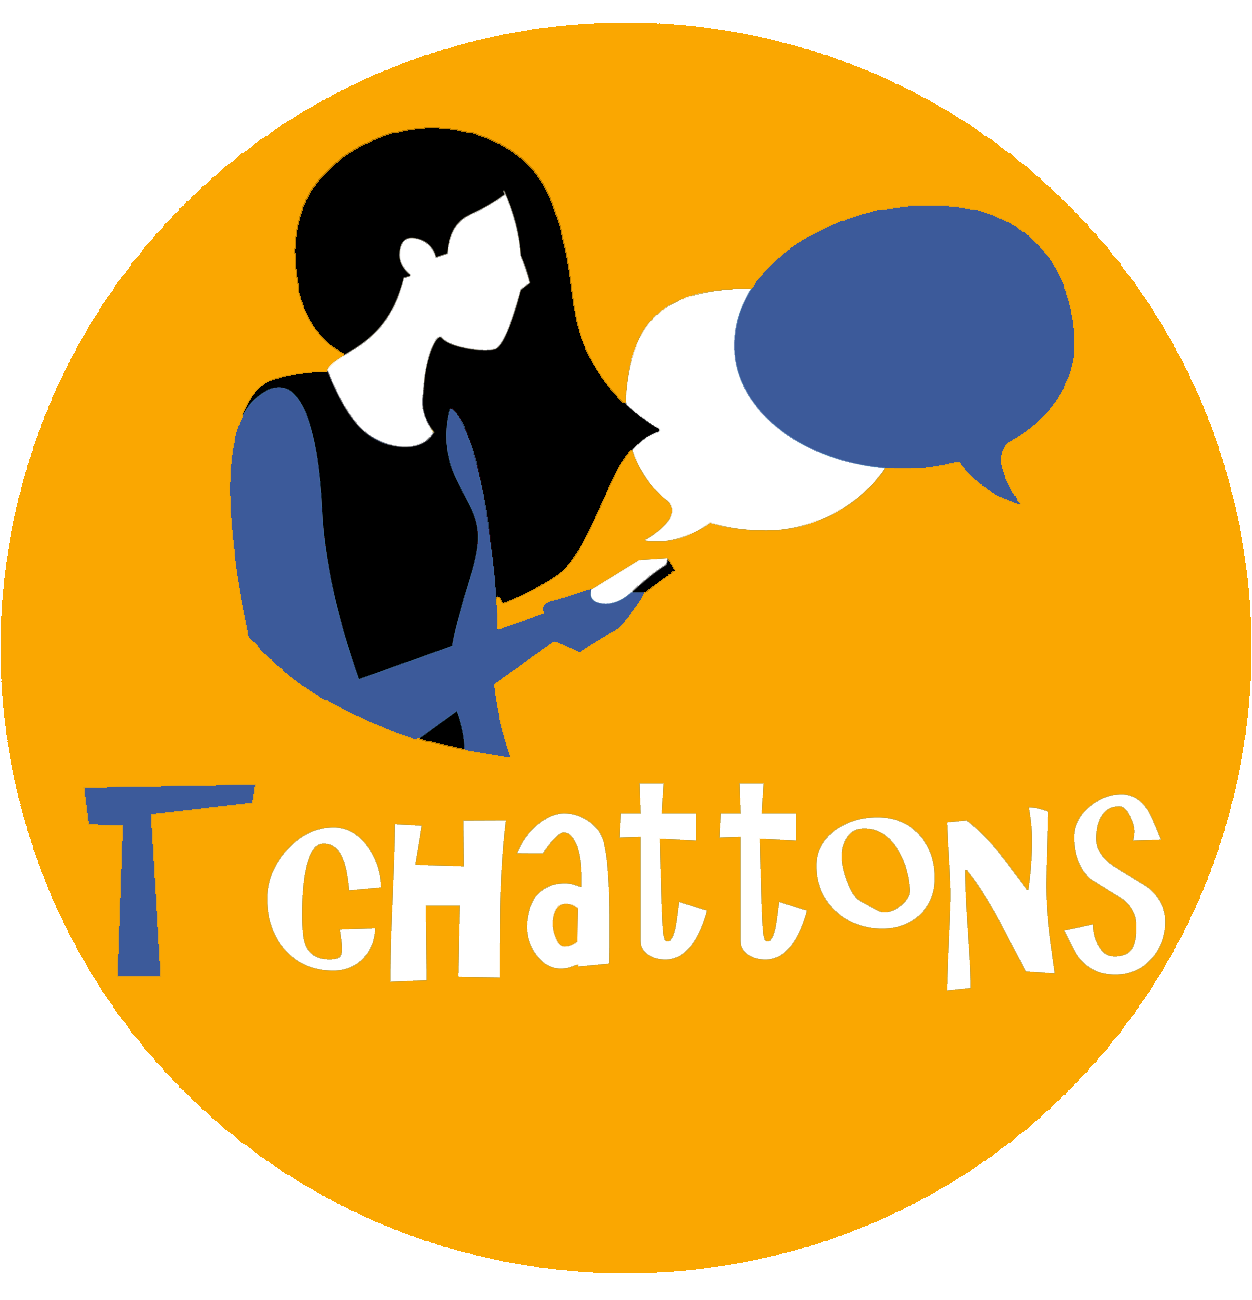 Tchattons